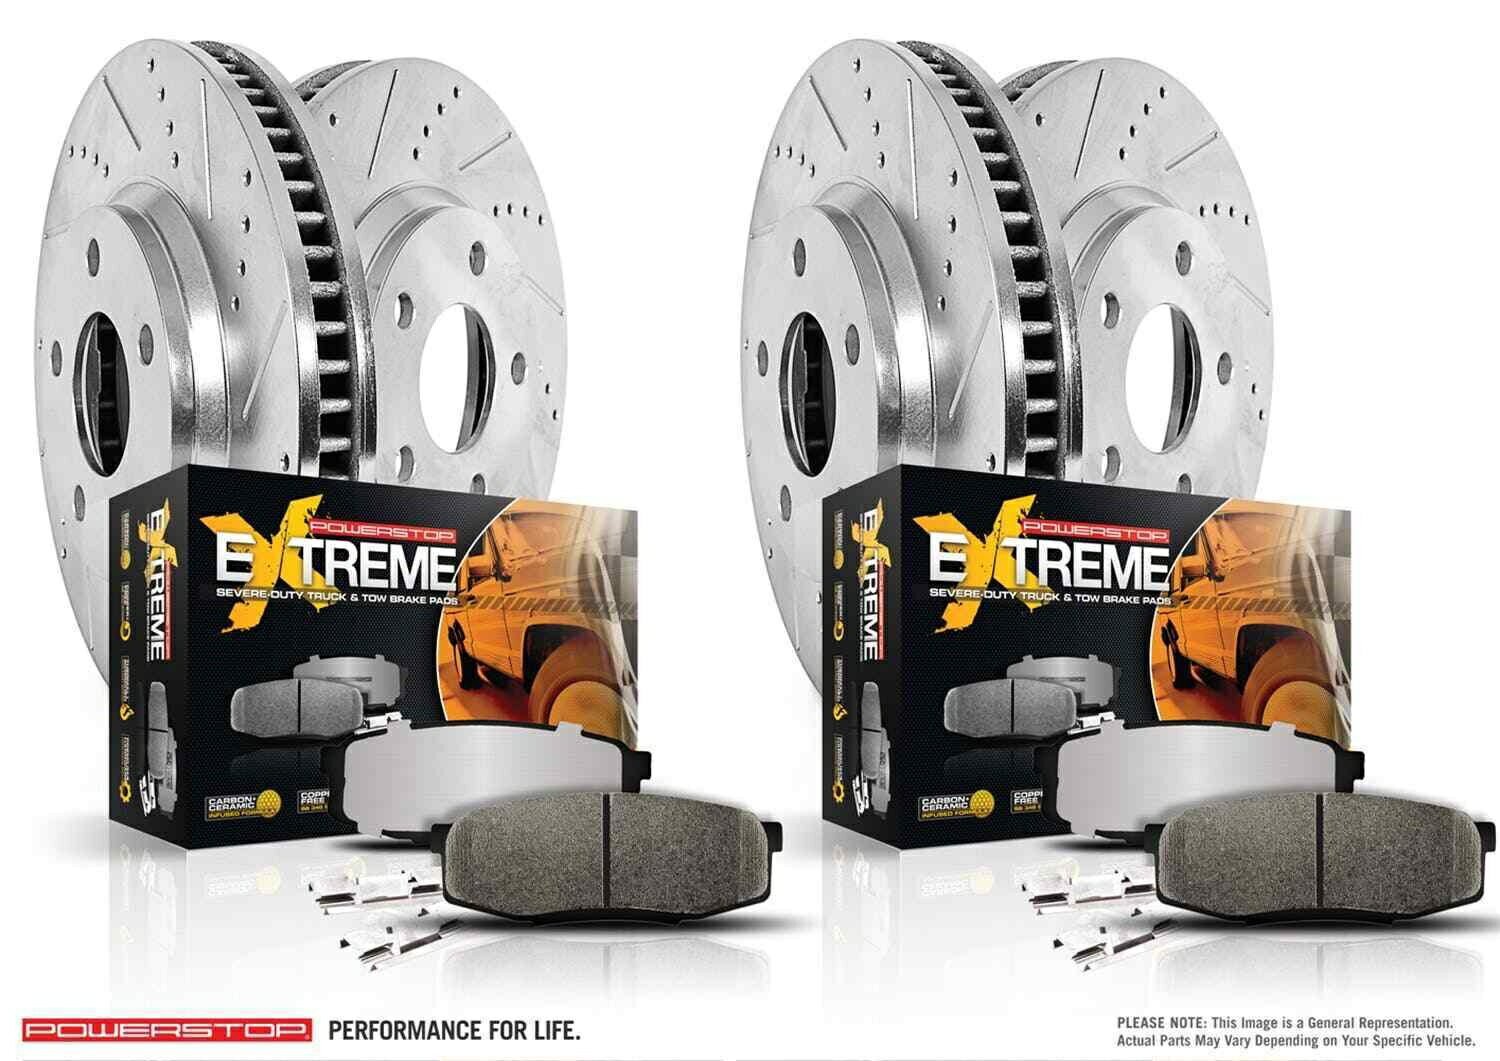 brake disc rotor パワーストップK6153-36 Z36トラック＆TOWランドローバーディスカバリー用のクリックブレーキキット Power Stop K6153-36 Z36 Truck & Tow 1-Click Brake Kit for Land Rover Discovery